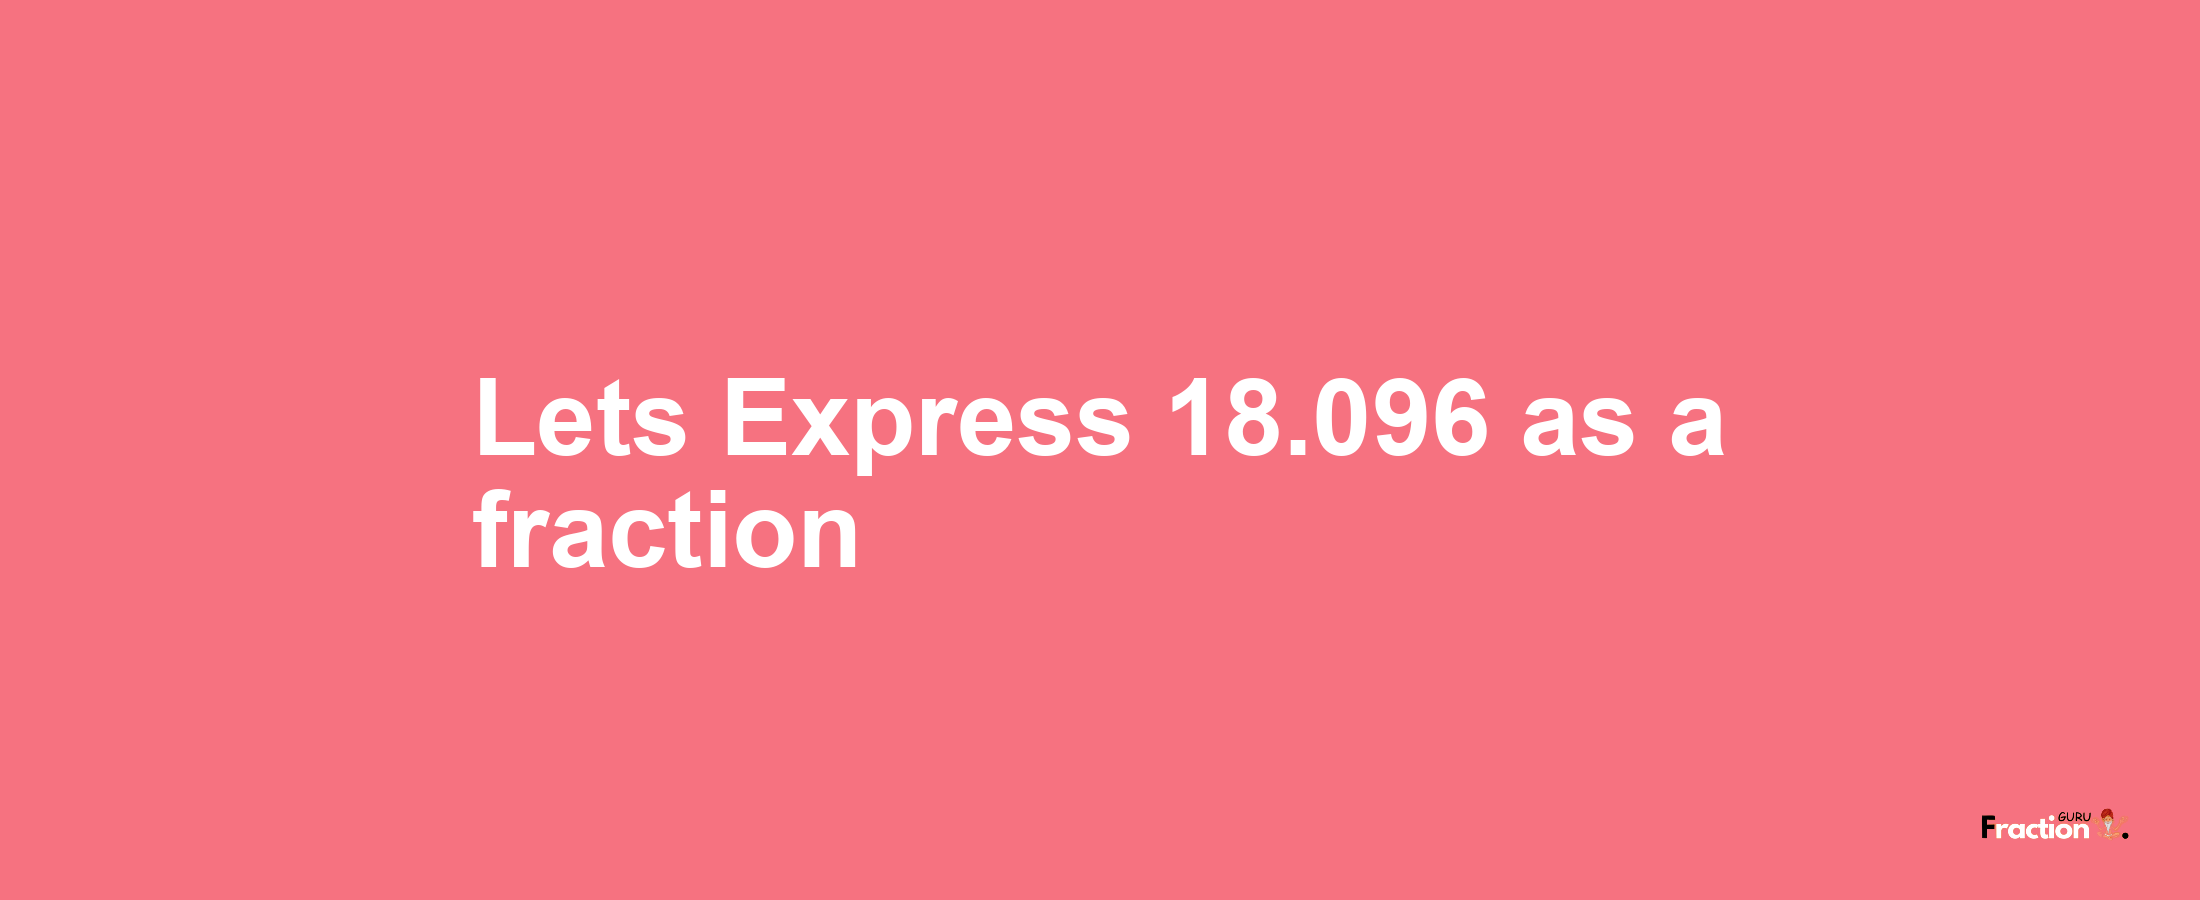 Lets Express 18.096 as afraction